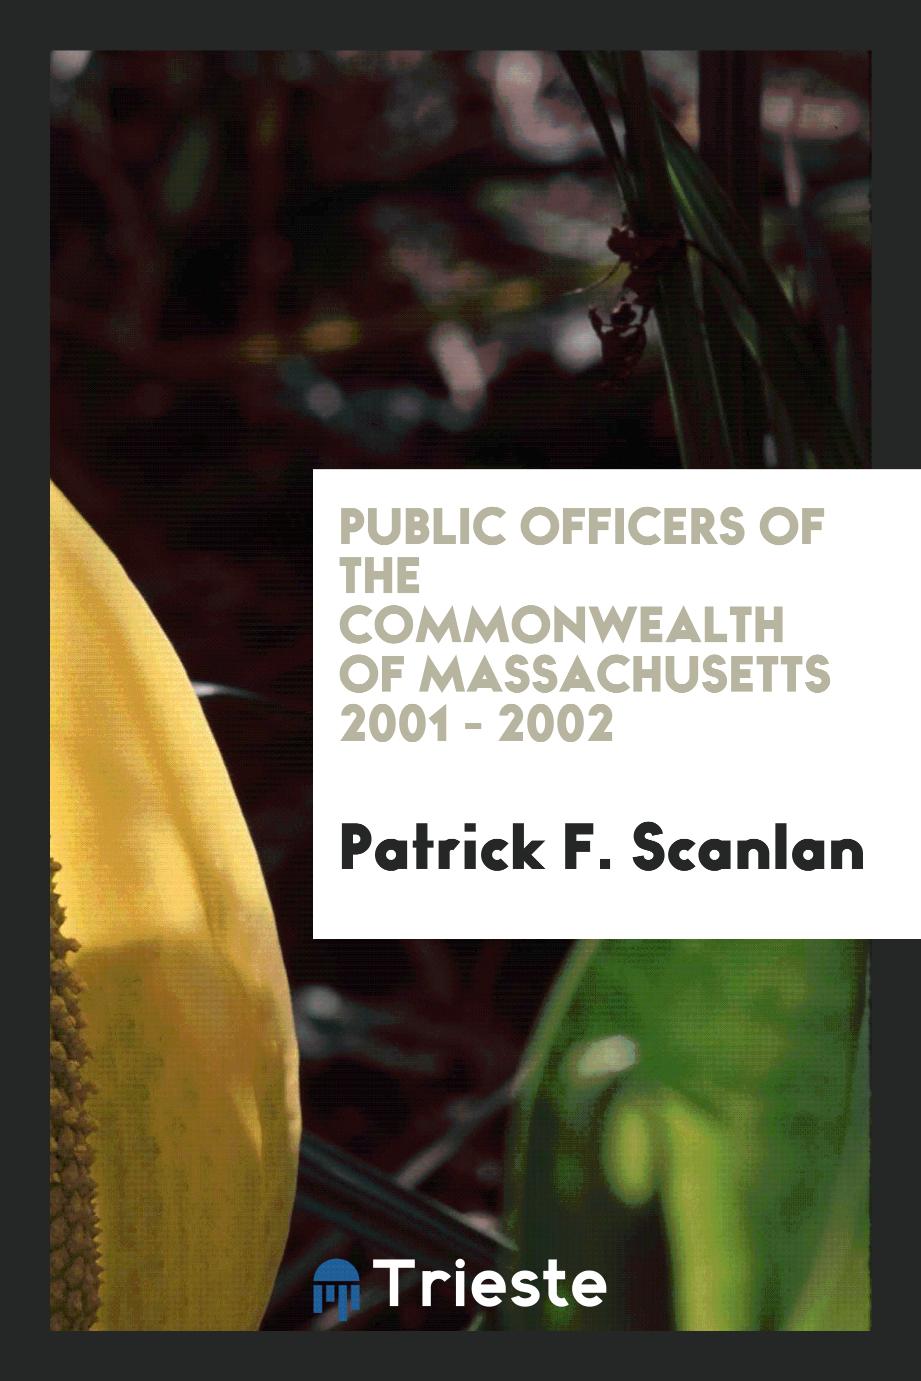 Public officers of the Commonwealth of Massachusetts 2001 - 2002